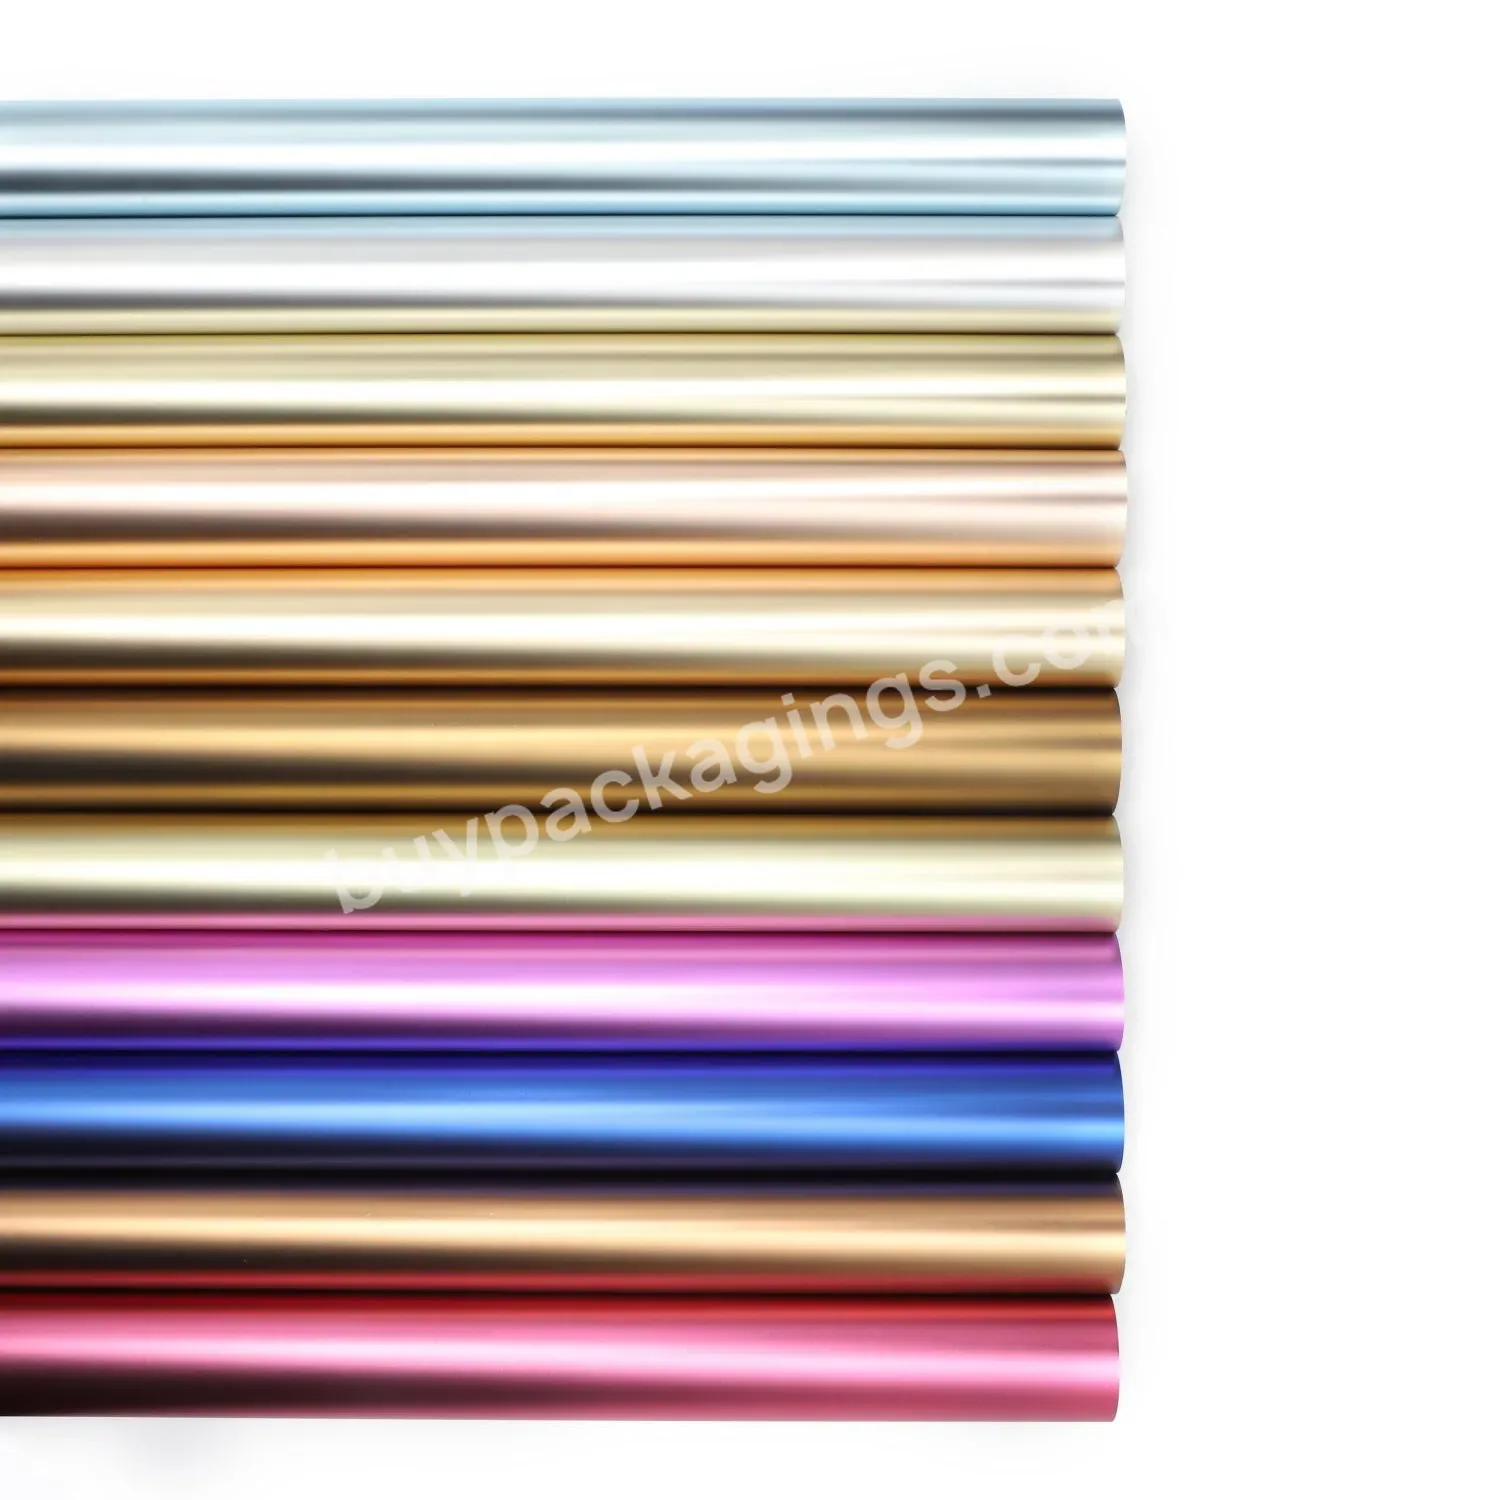 Luxury Shining Sparkling Surface Flower Wrapping Paper Sheet Roll With Metallic Gloss Printing - Buy Shining Sparkling Surface Flower Wrapping Paper,Flower Wrapping Paper Sheet Roll,Wrapping Paper Sheet Roll With Metallic Gloss Printing.